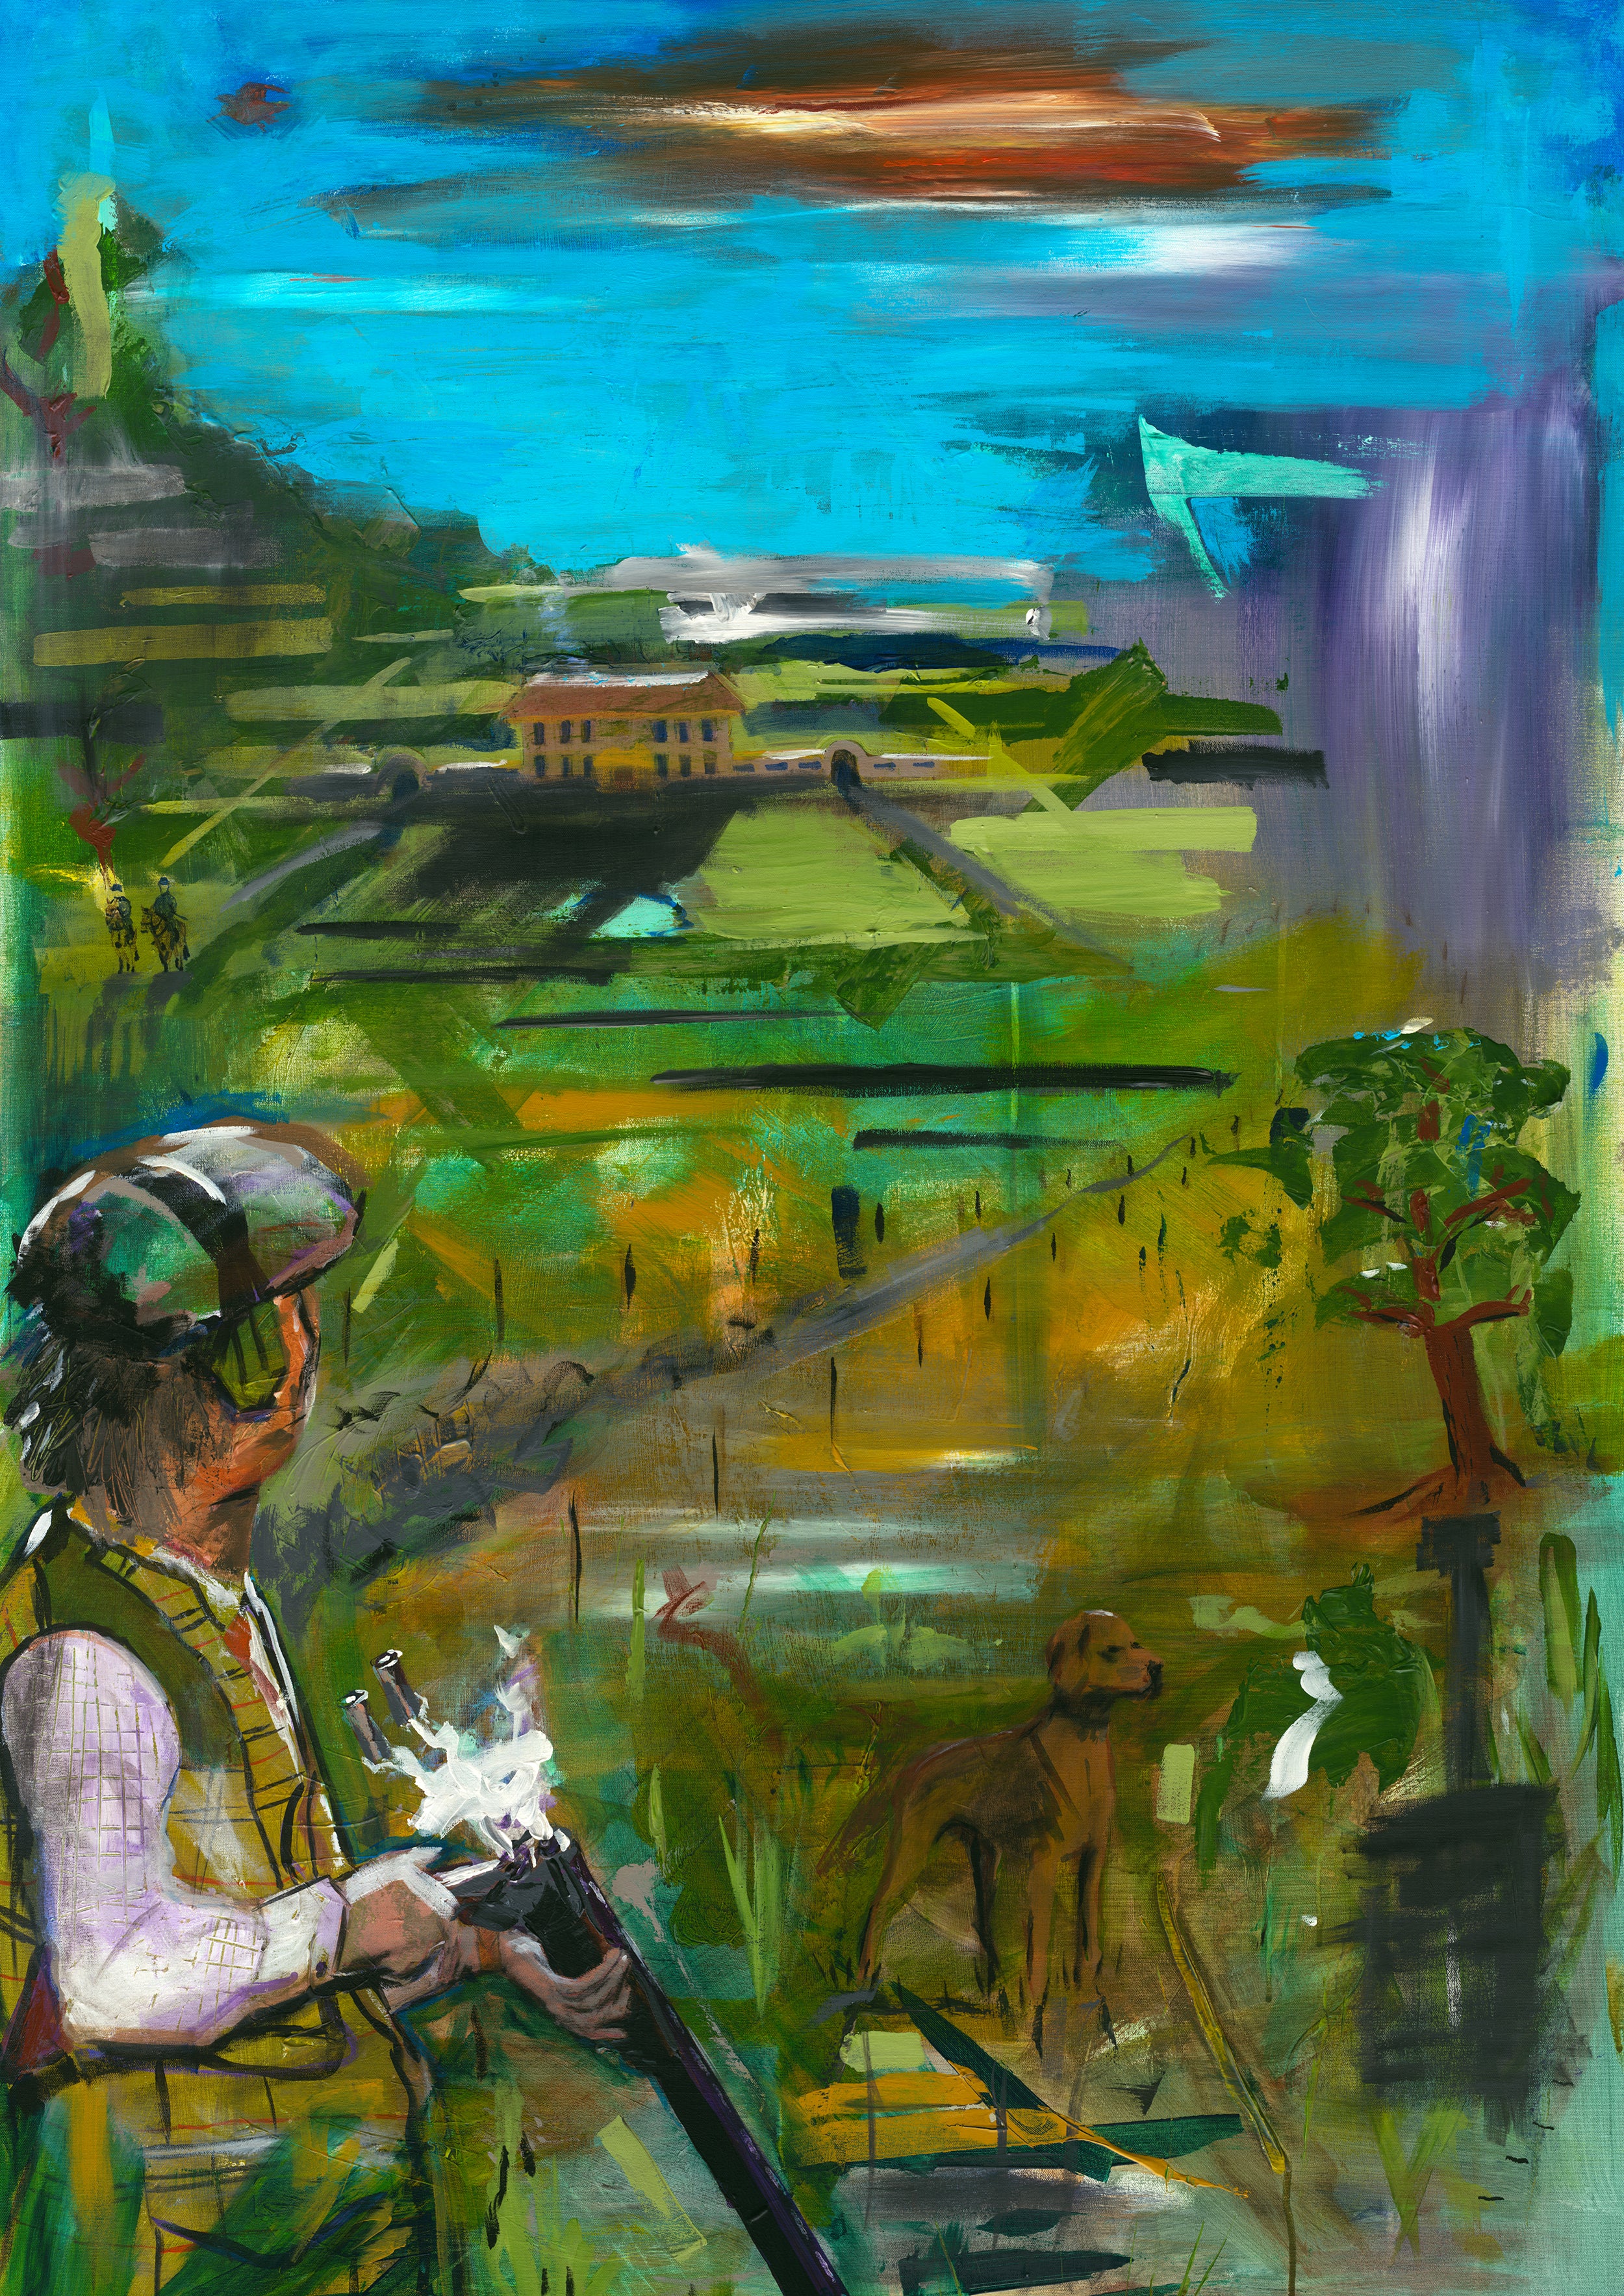 A close up of limited edition print titled ‘Countryside’. It features a rural scene of a man hunting in the countryside, holding a gun and accompanied by a dog. A house can be seen in the distance, surrounded by abstract fields and trees. 